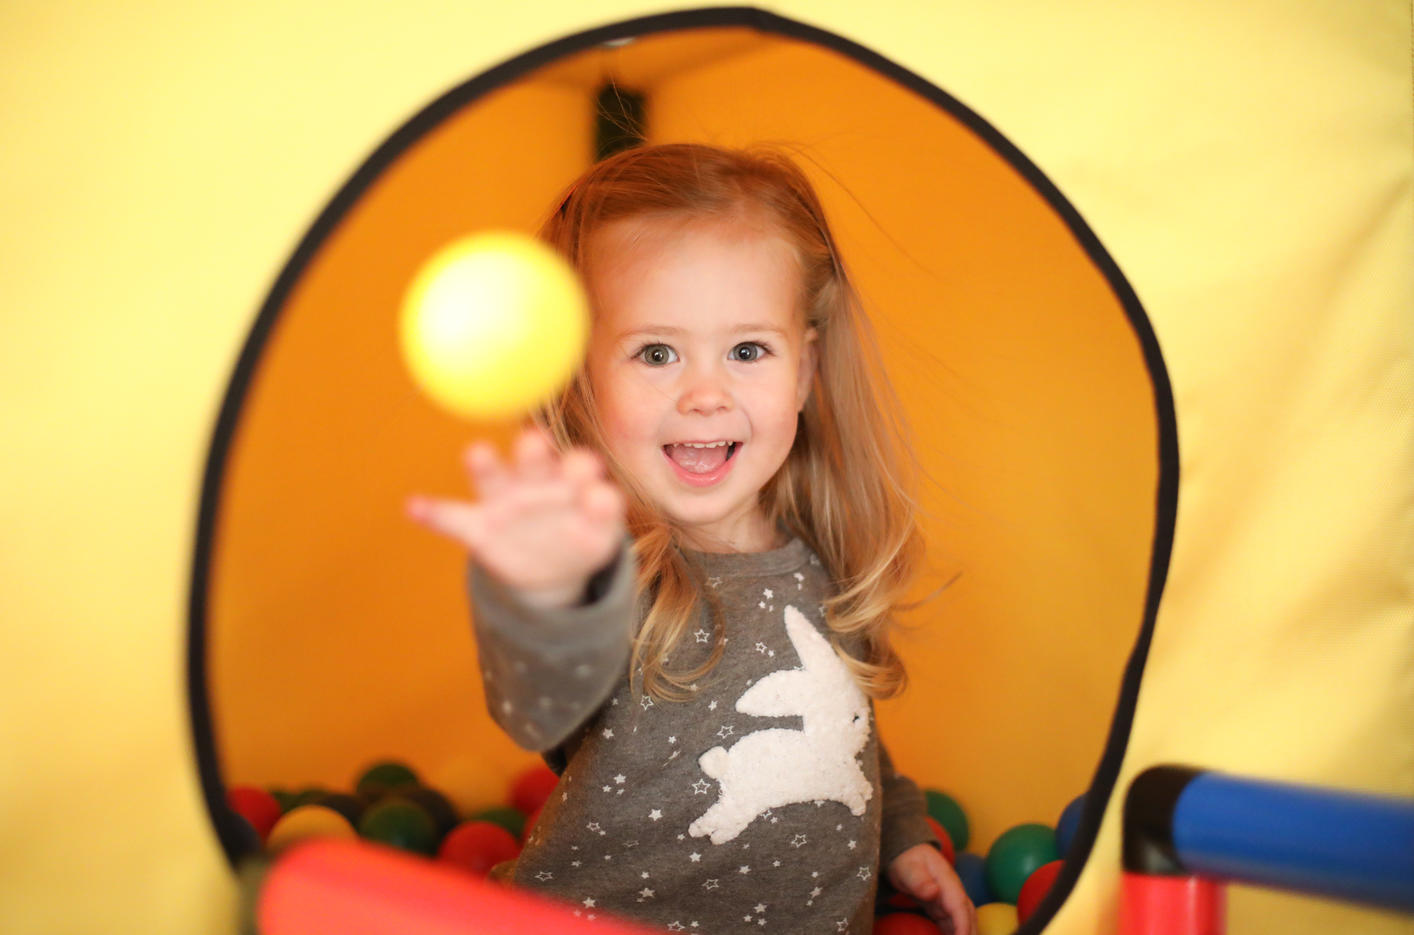 Girl playing in QUADRO ball pit